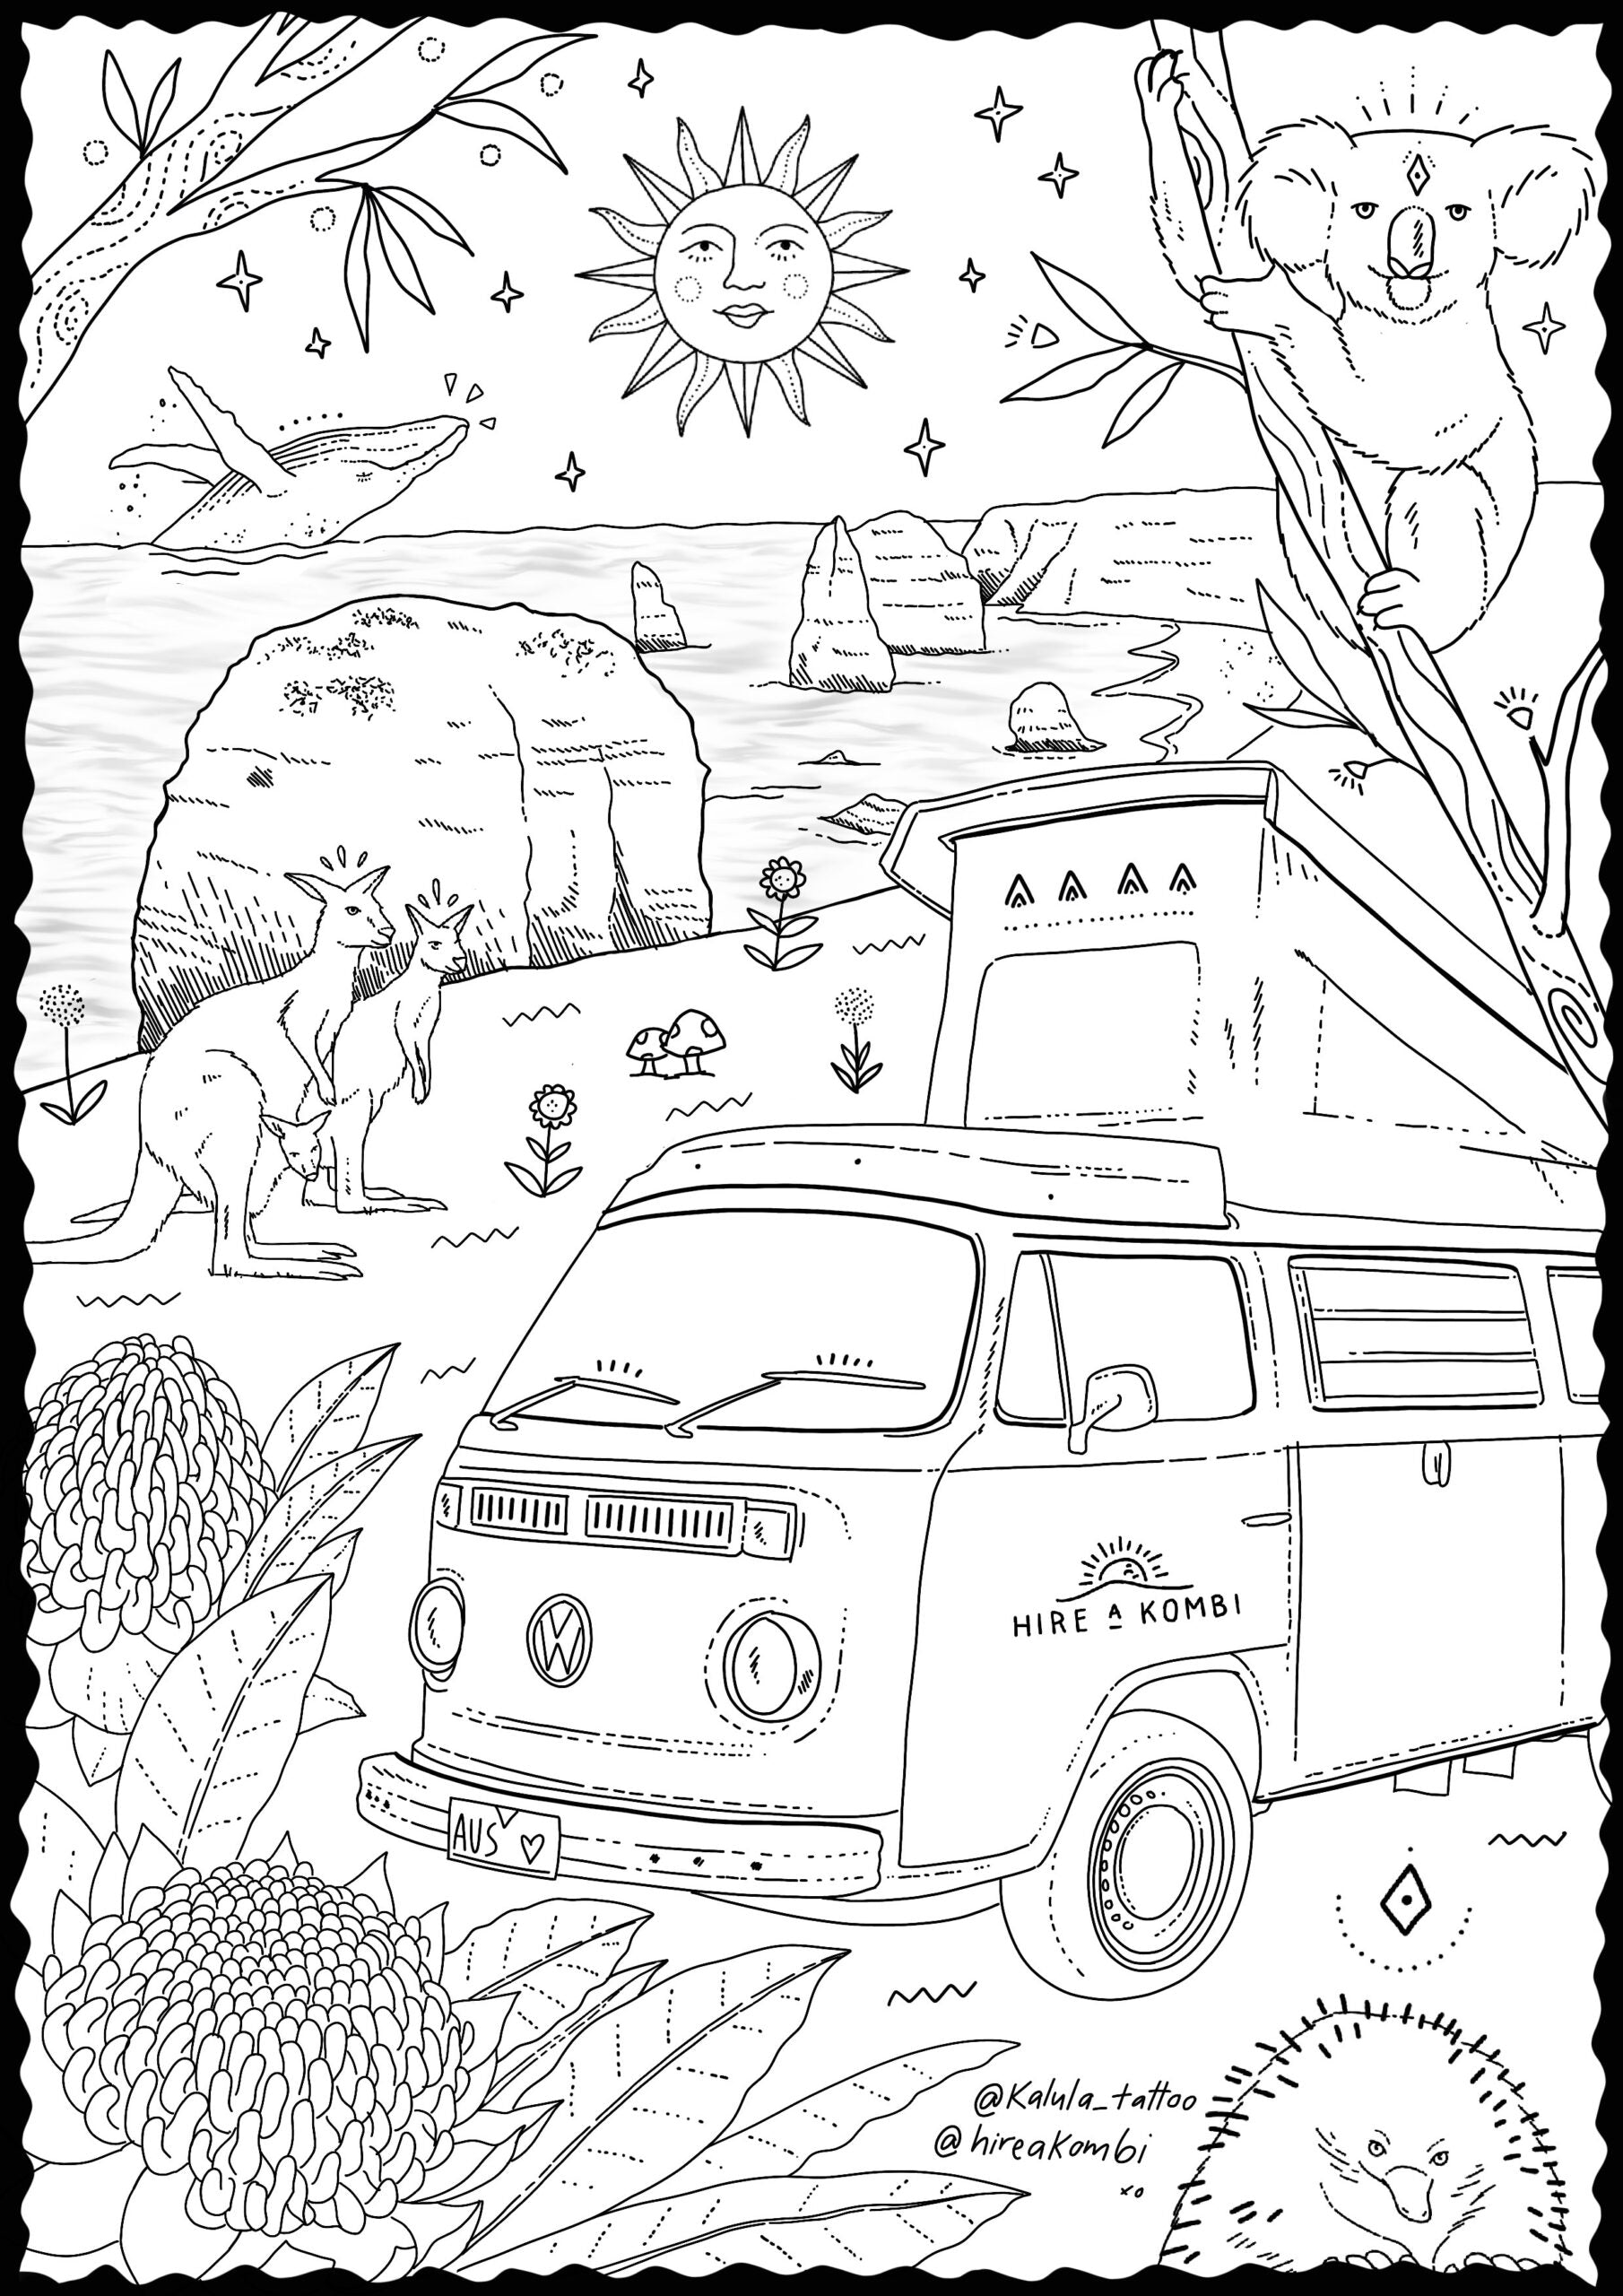 Hire a Kombi Colouring In – Great Ocean Road